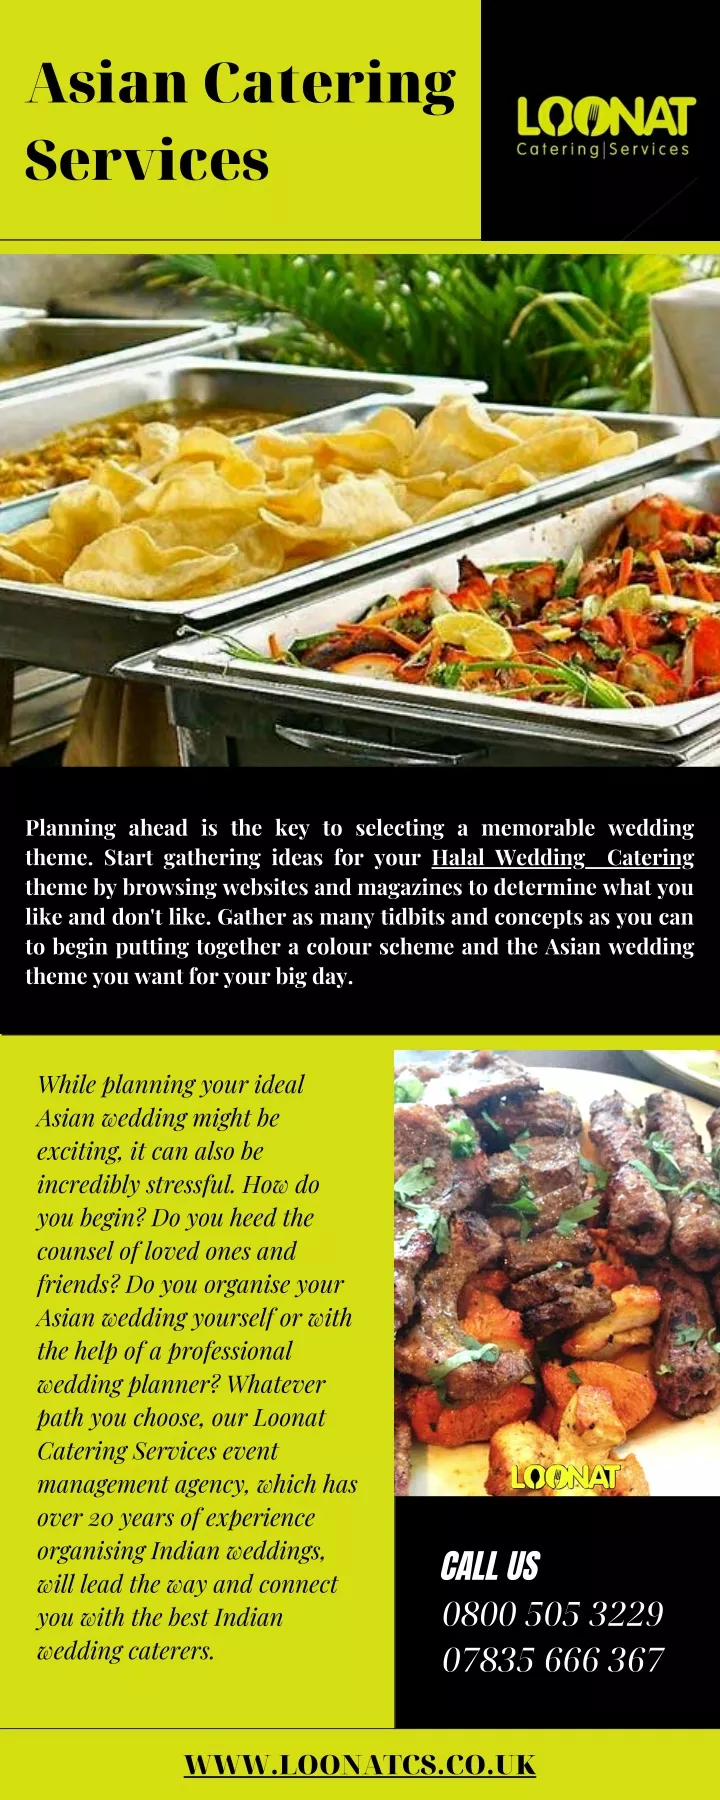 asian catering services